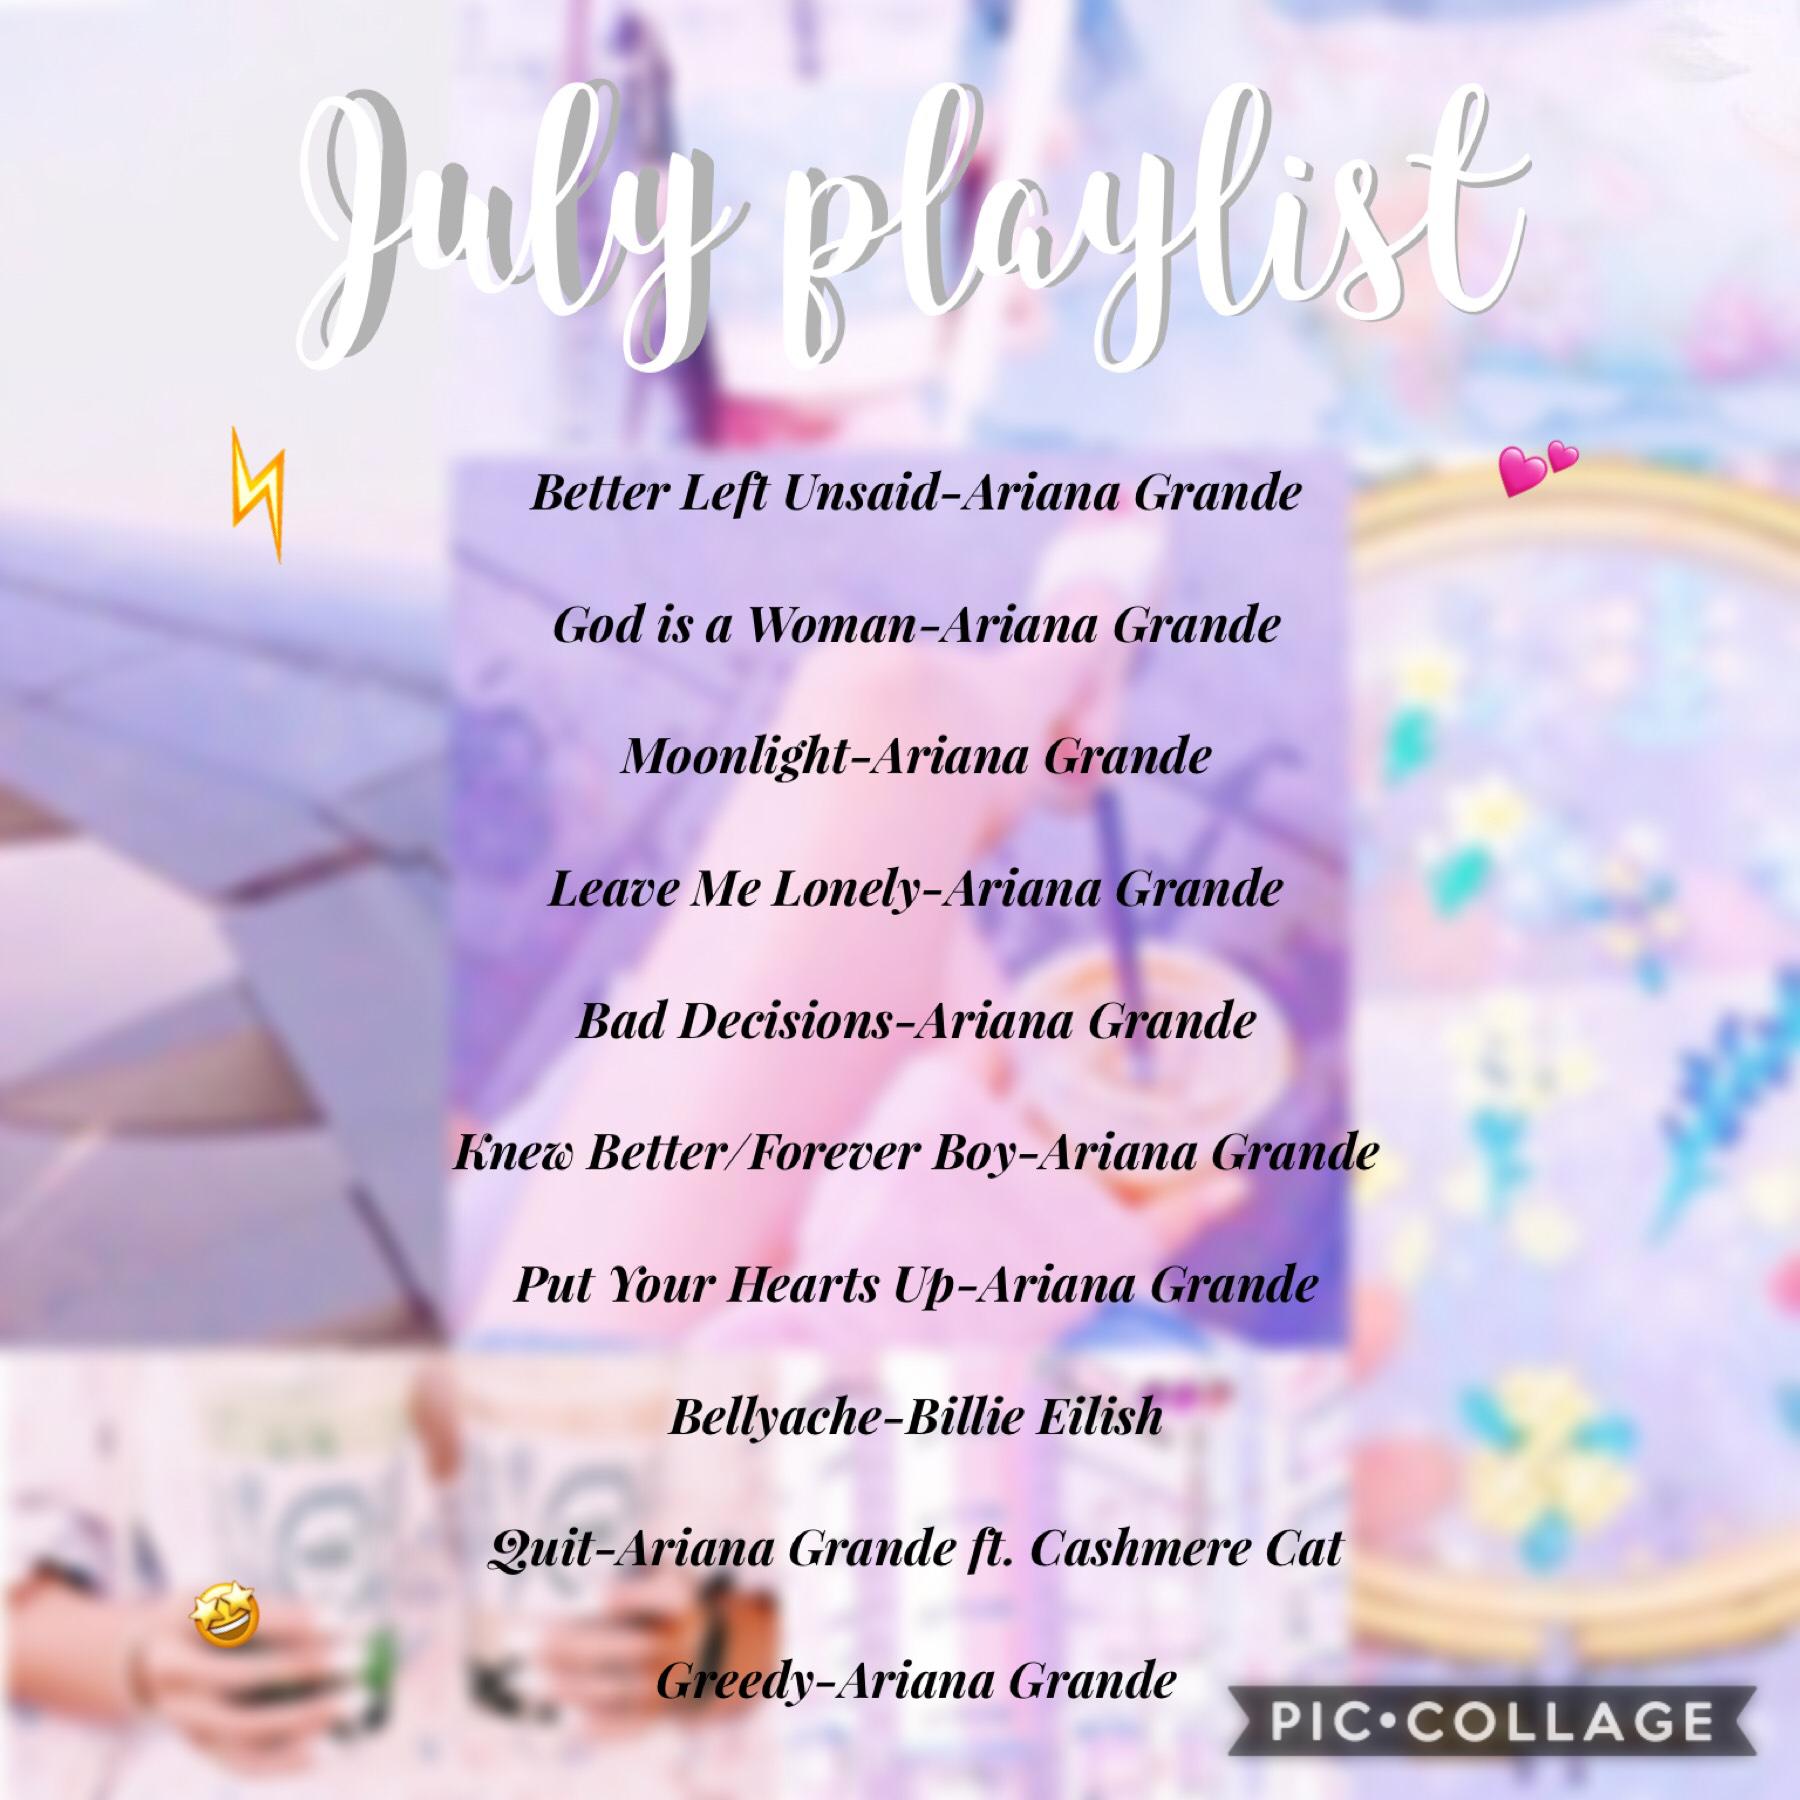 Hey small post. I’m making an edit atm but what’s your fav song on this playlist? Mine is a tie between “Leave me Lonely” and “Better Left Unsaid” 🤩🤩👍🏻👍🏻